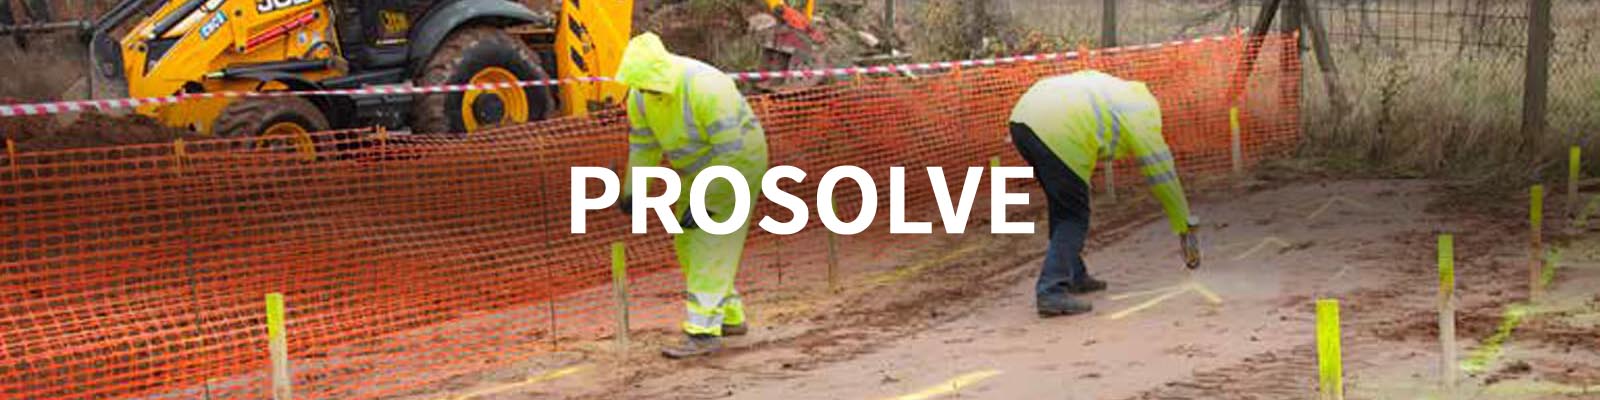 ProSolve Products being used on a Building Site